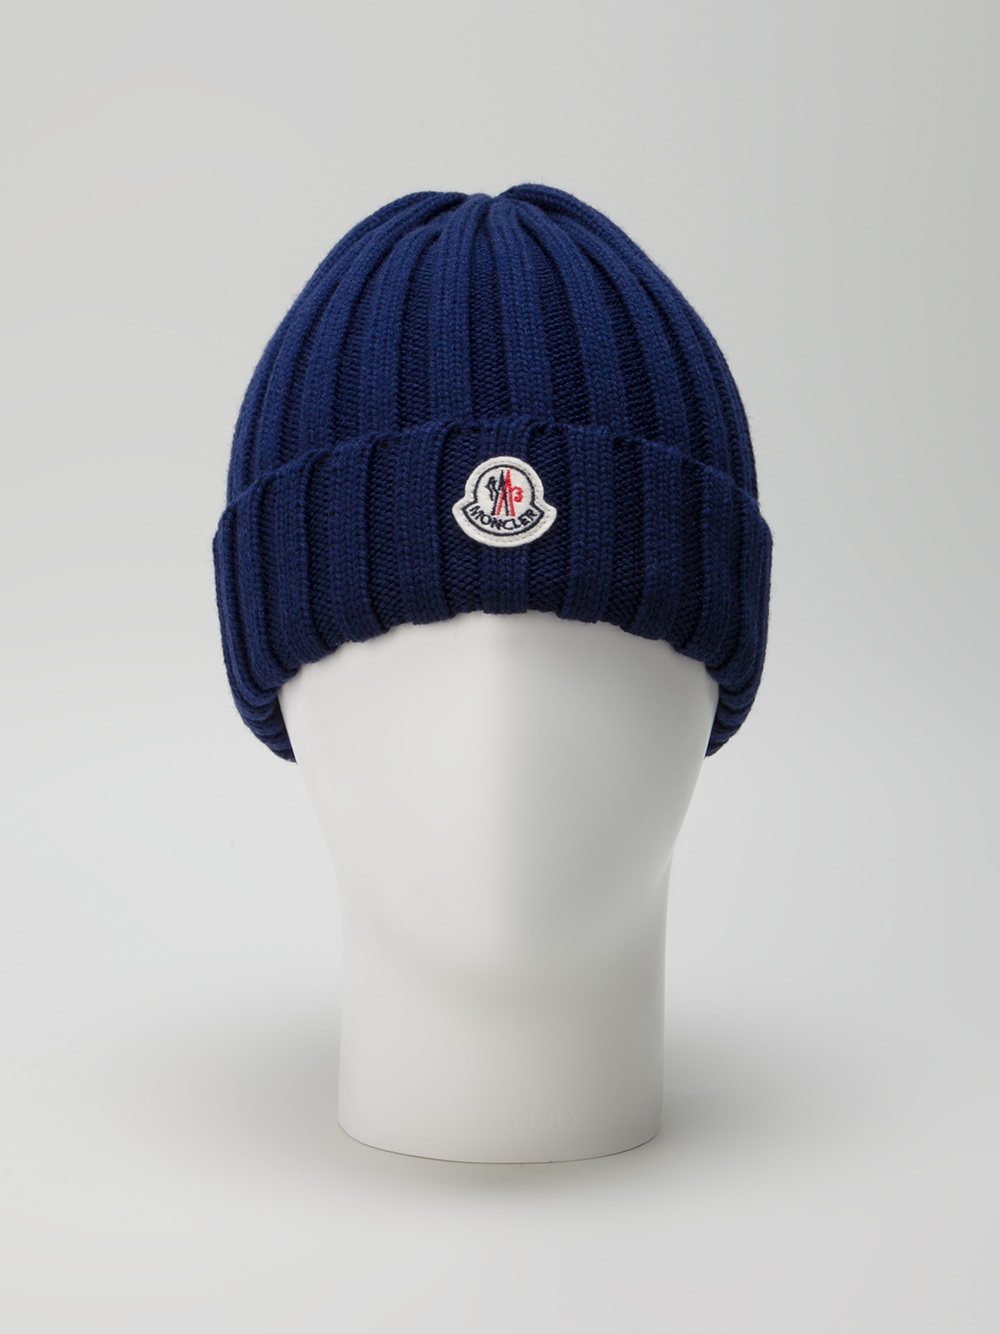 Moncler Wool Ribbed Knit Beanie Hat in Blue for Men - Lyst